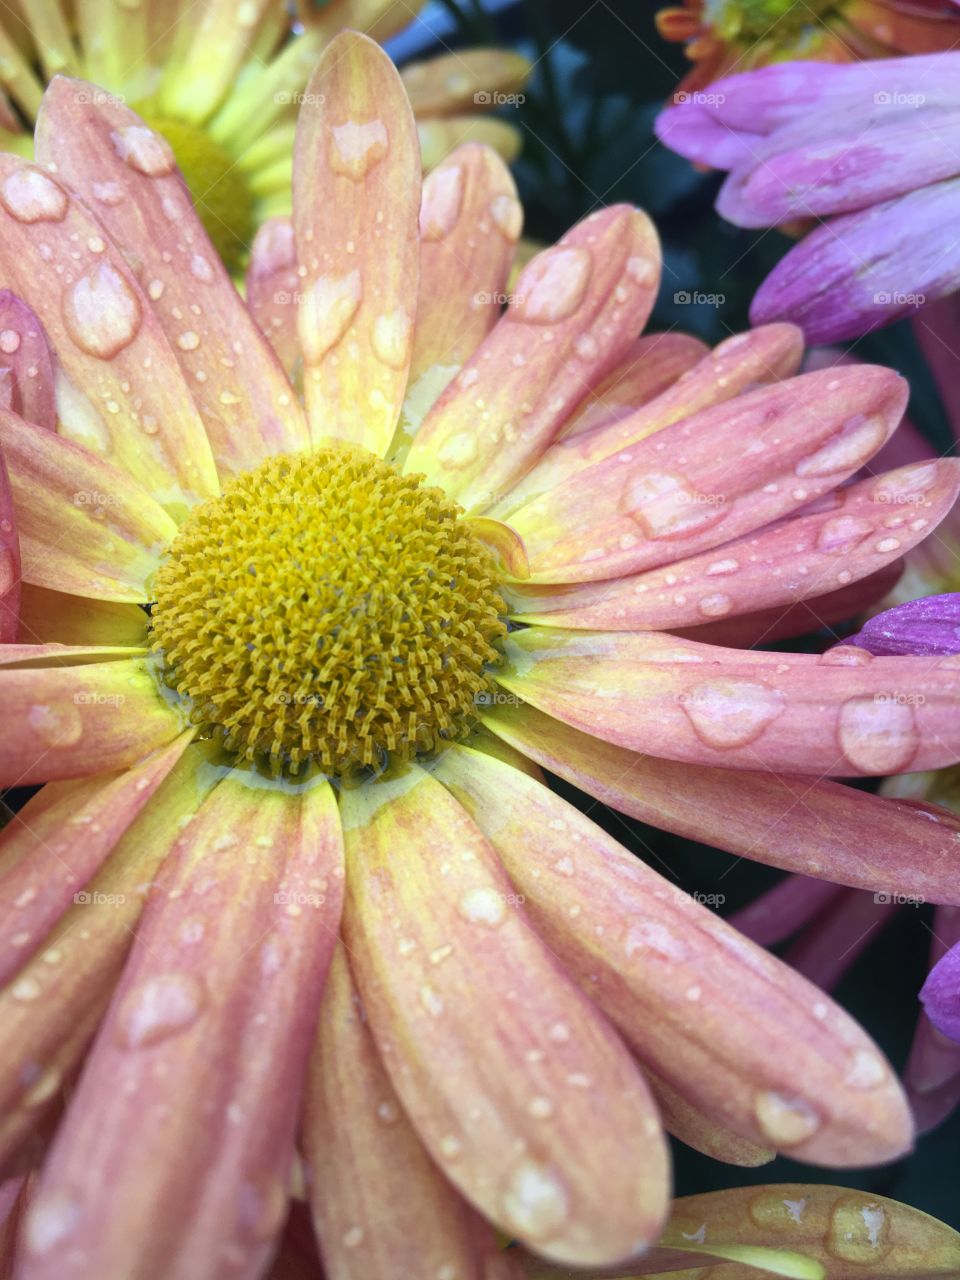 Colors of Spring! Raindrops sit gently on blooms in the early morning hours 